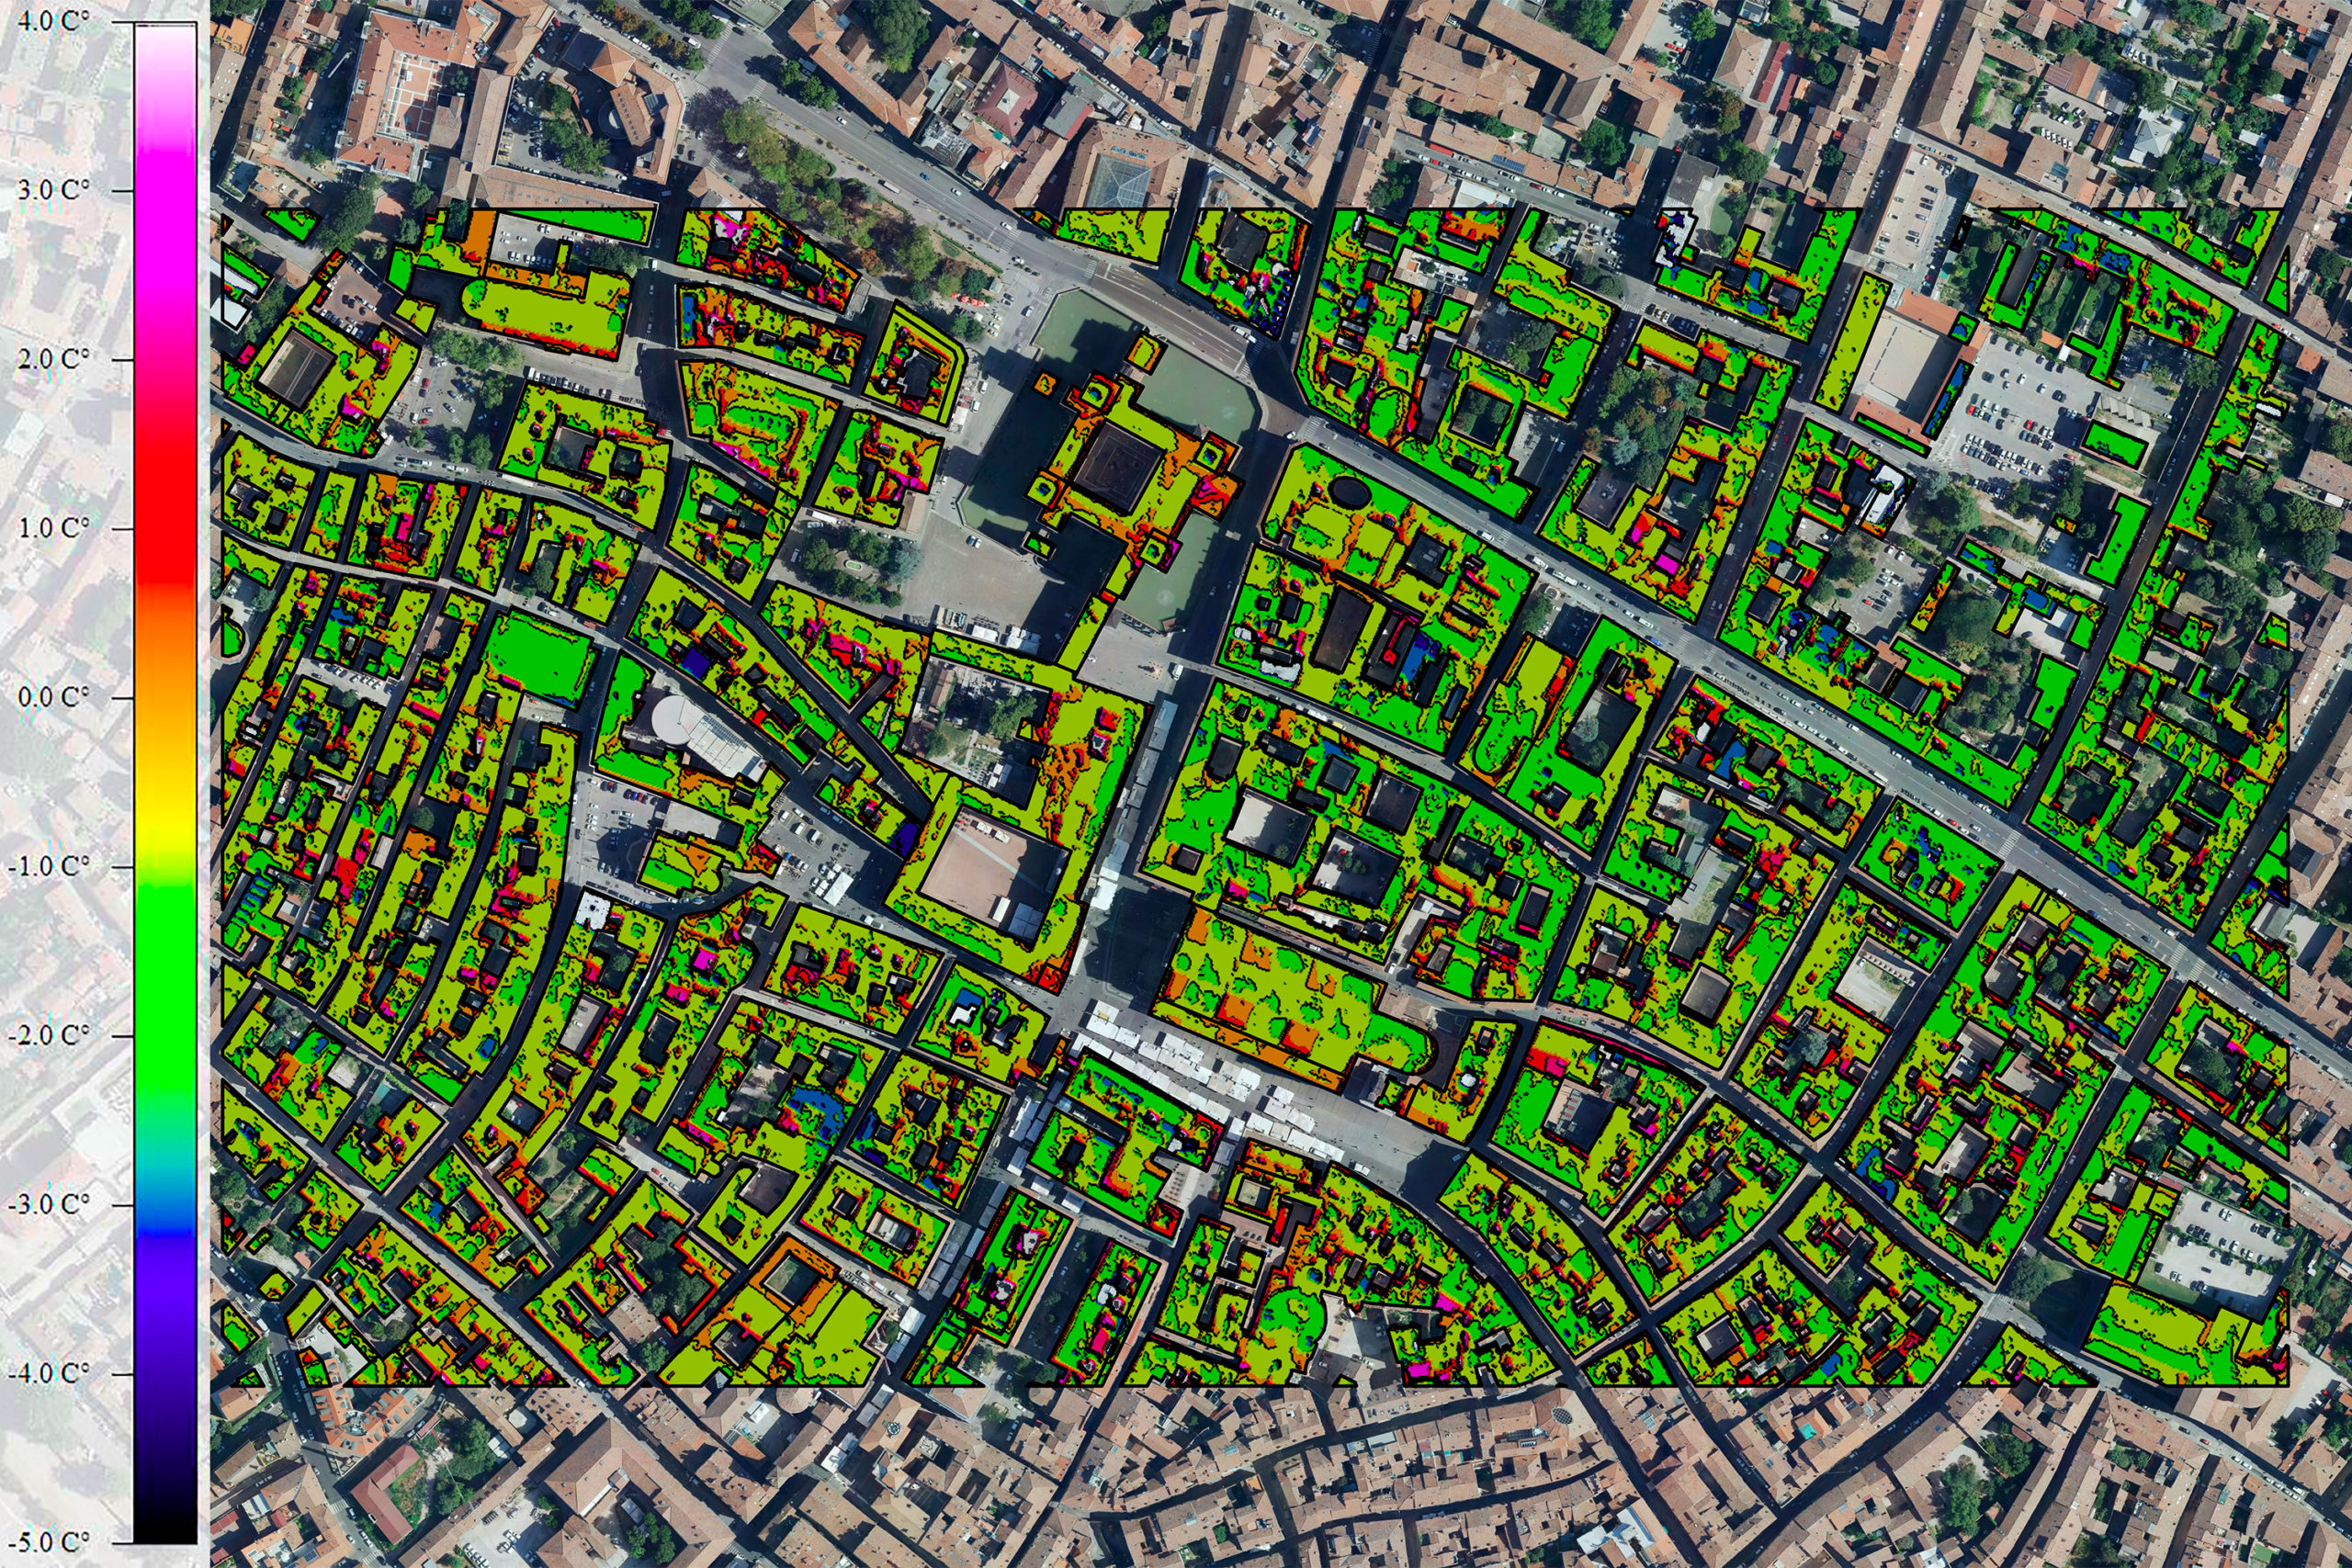 Ferrara Thermography Combination of Thermal Data and True Orthophoto